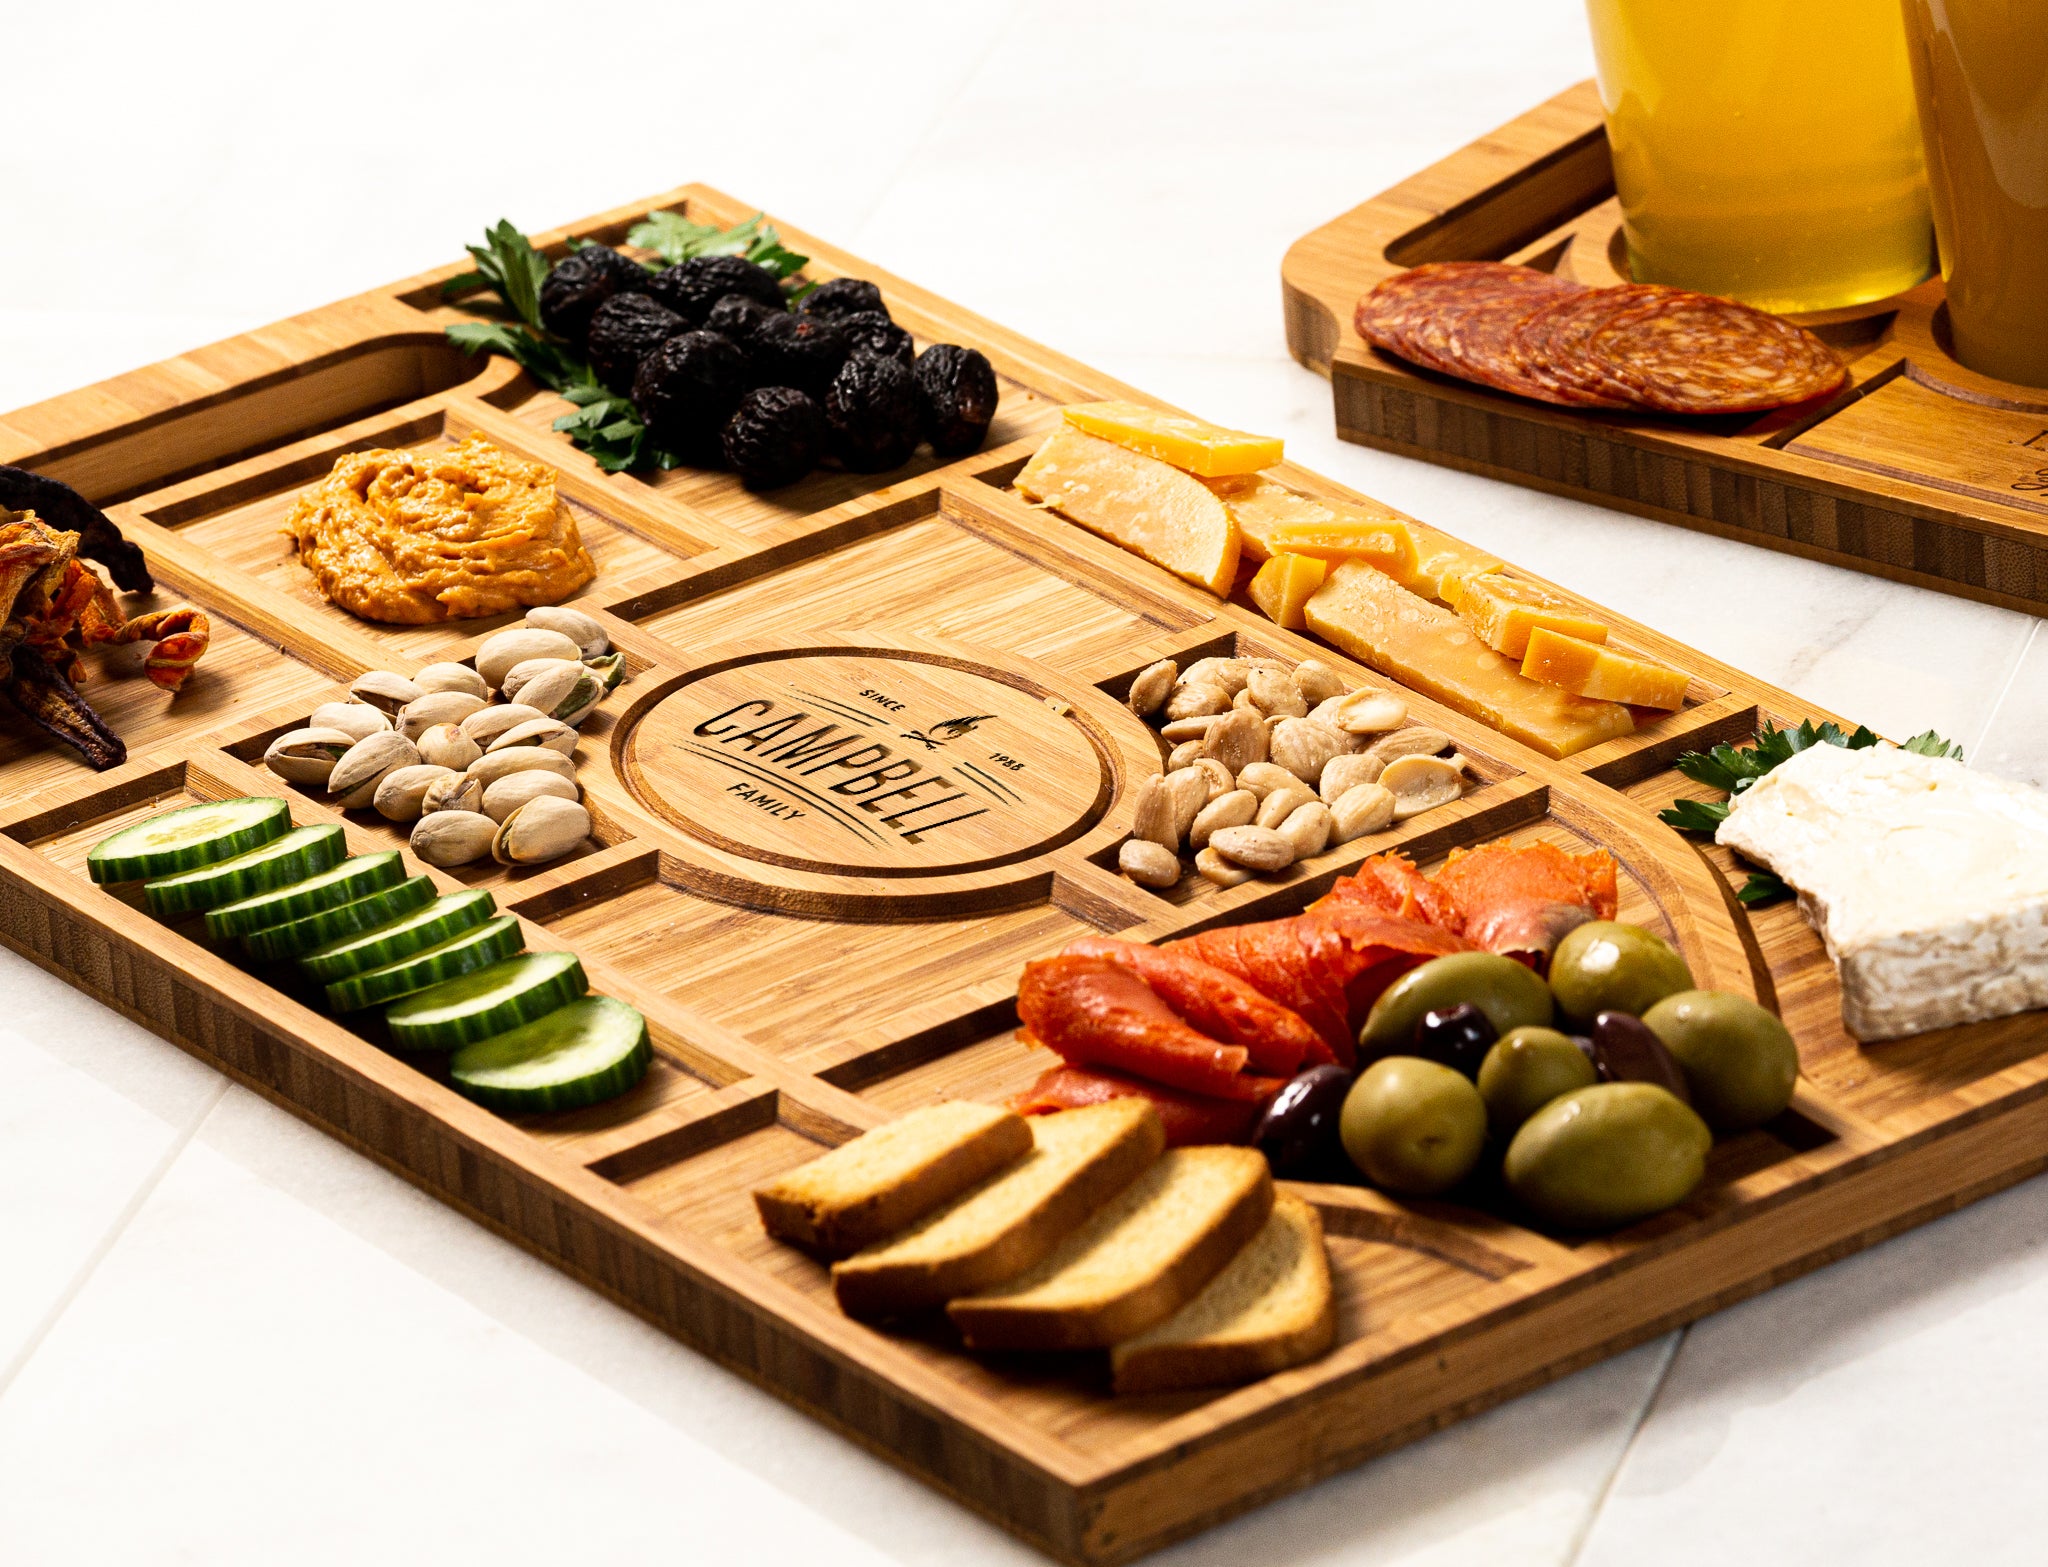 Personalized Beer Flights and Charcuterie Planks 4 Piece Gift Set